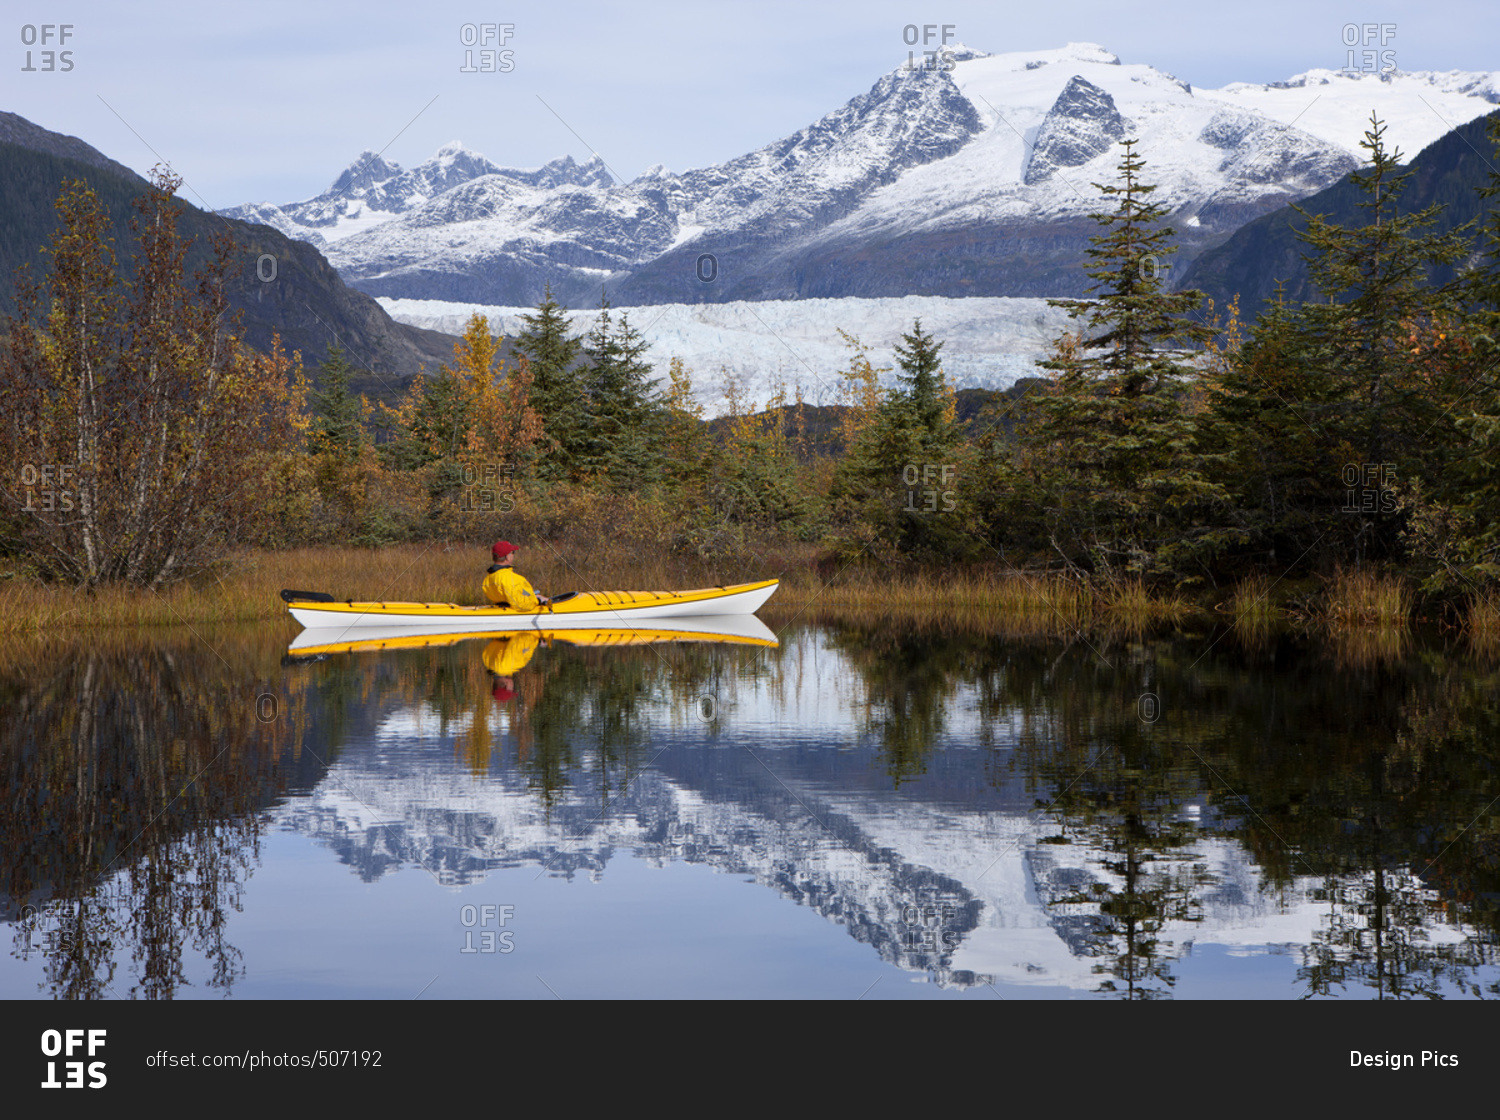 Person In Sea Kayak In A Lake Near Mendenhall Glacier, Tongass National Forest, Juneau, Southeast Alaska, Autumn